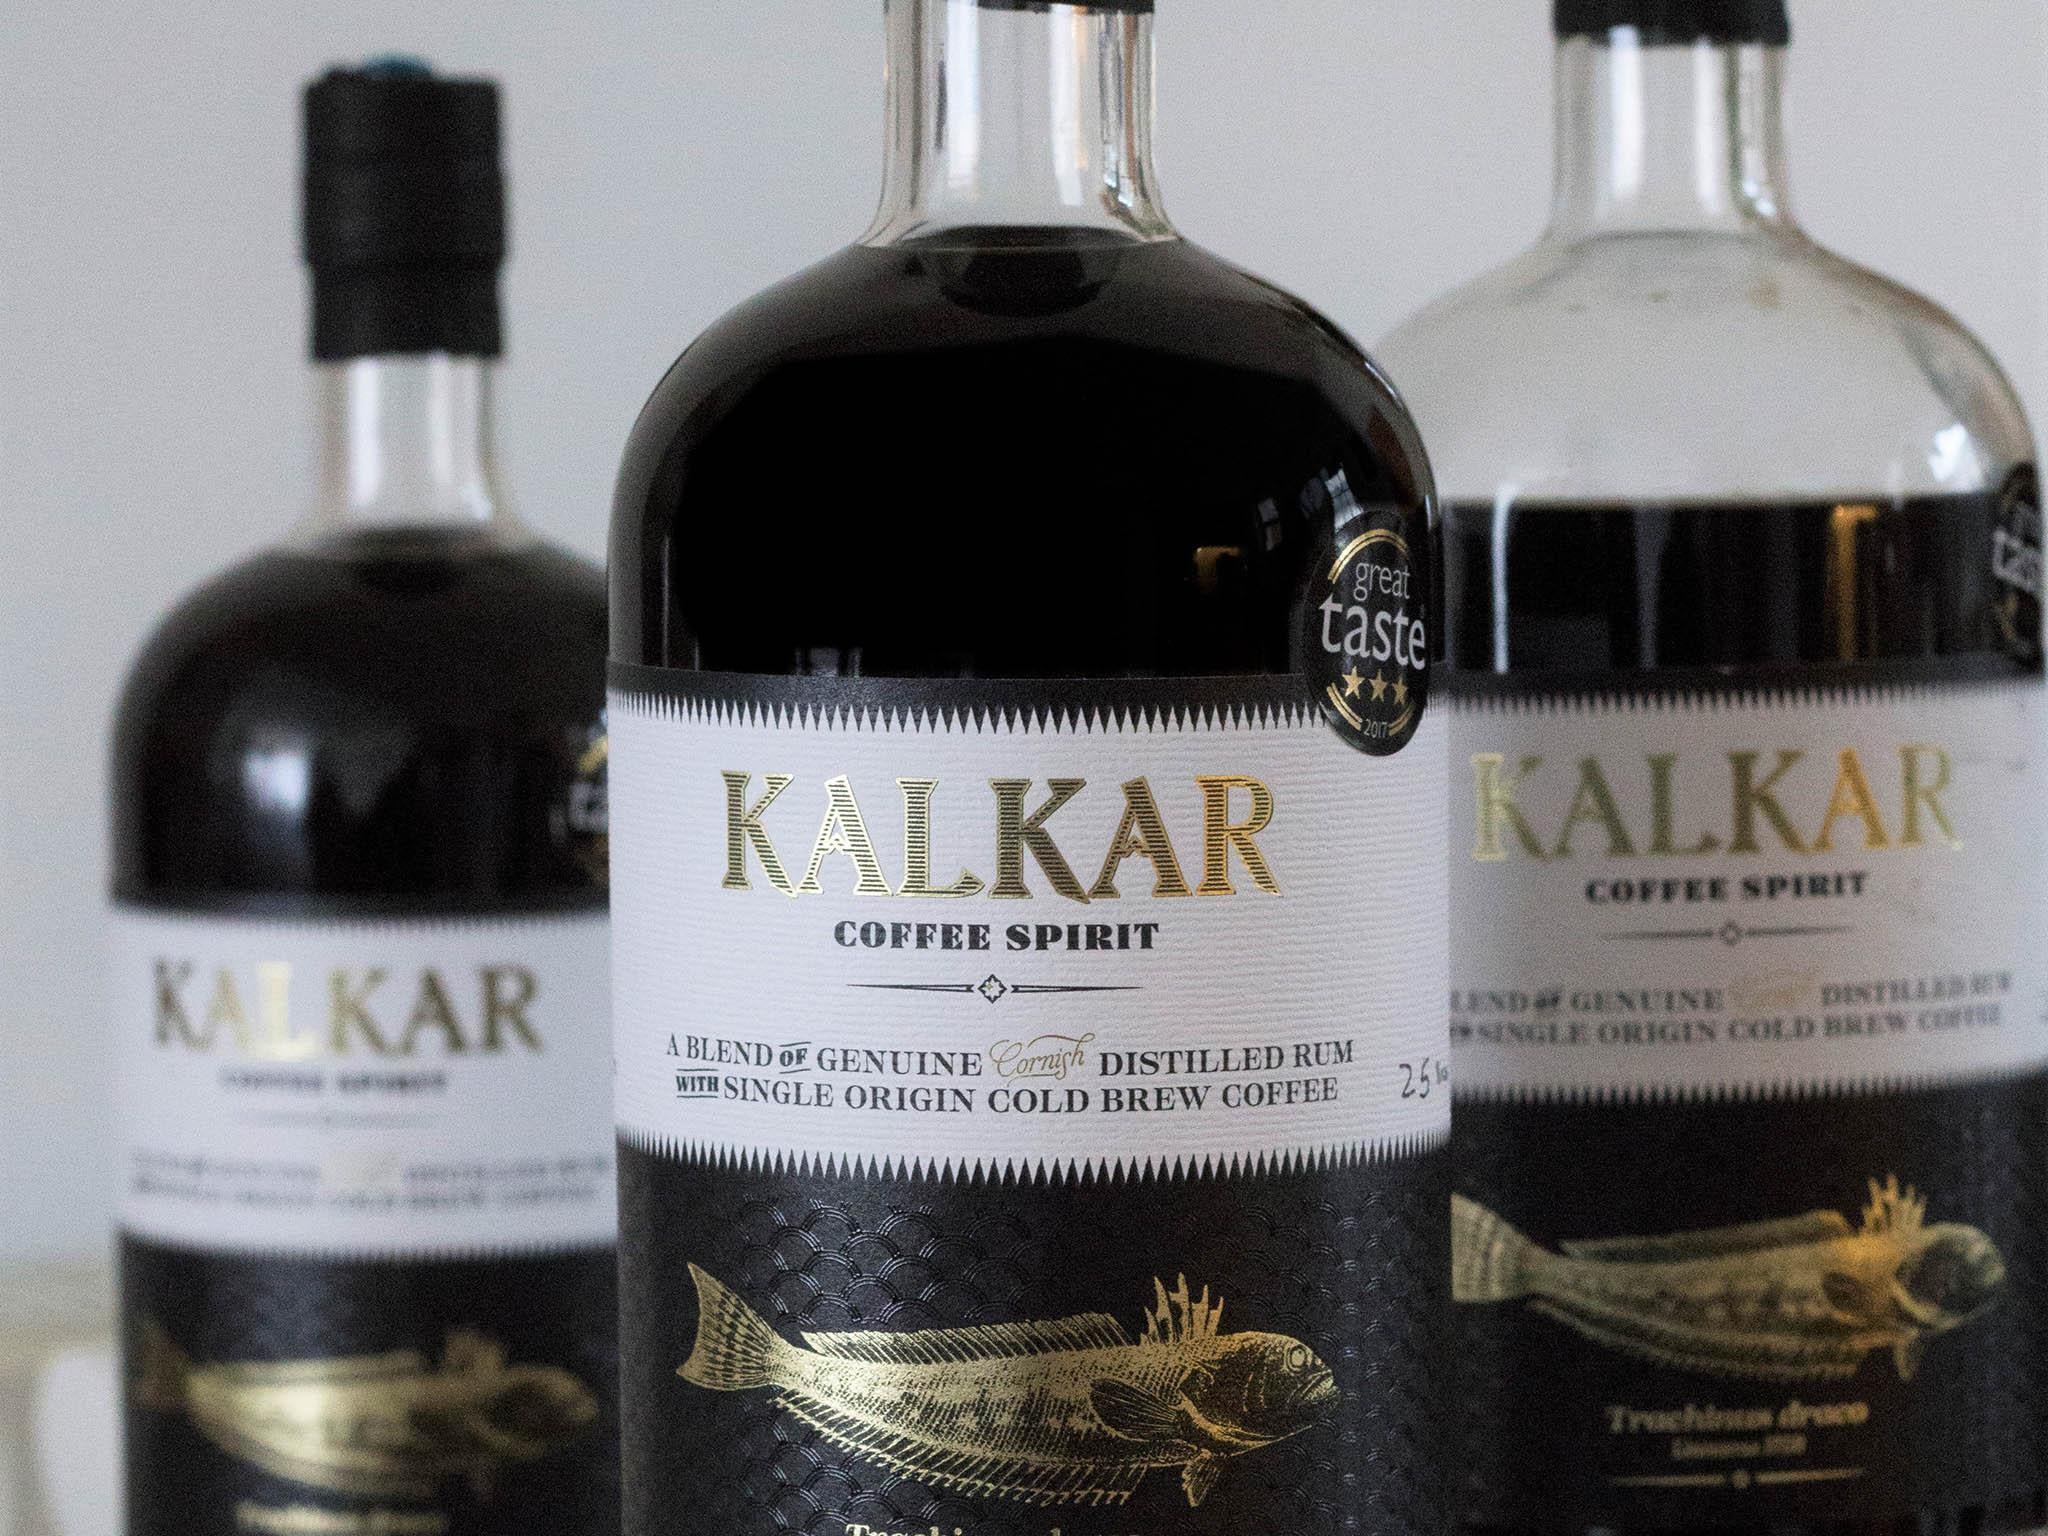 Kalkar is a complex concoction made of simple ingredients